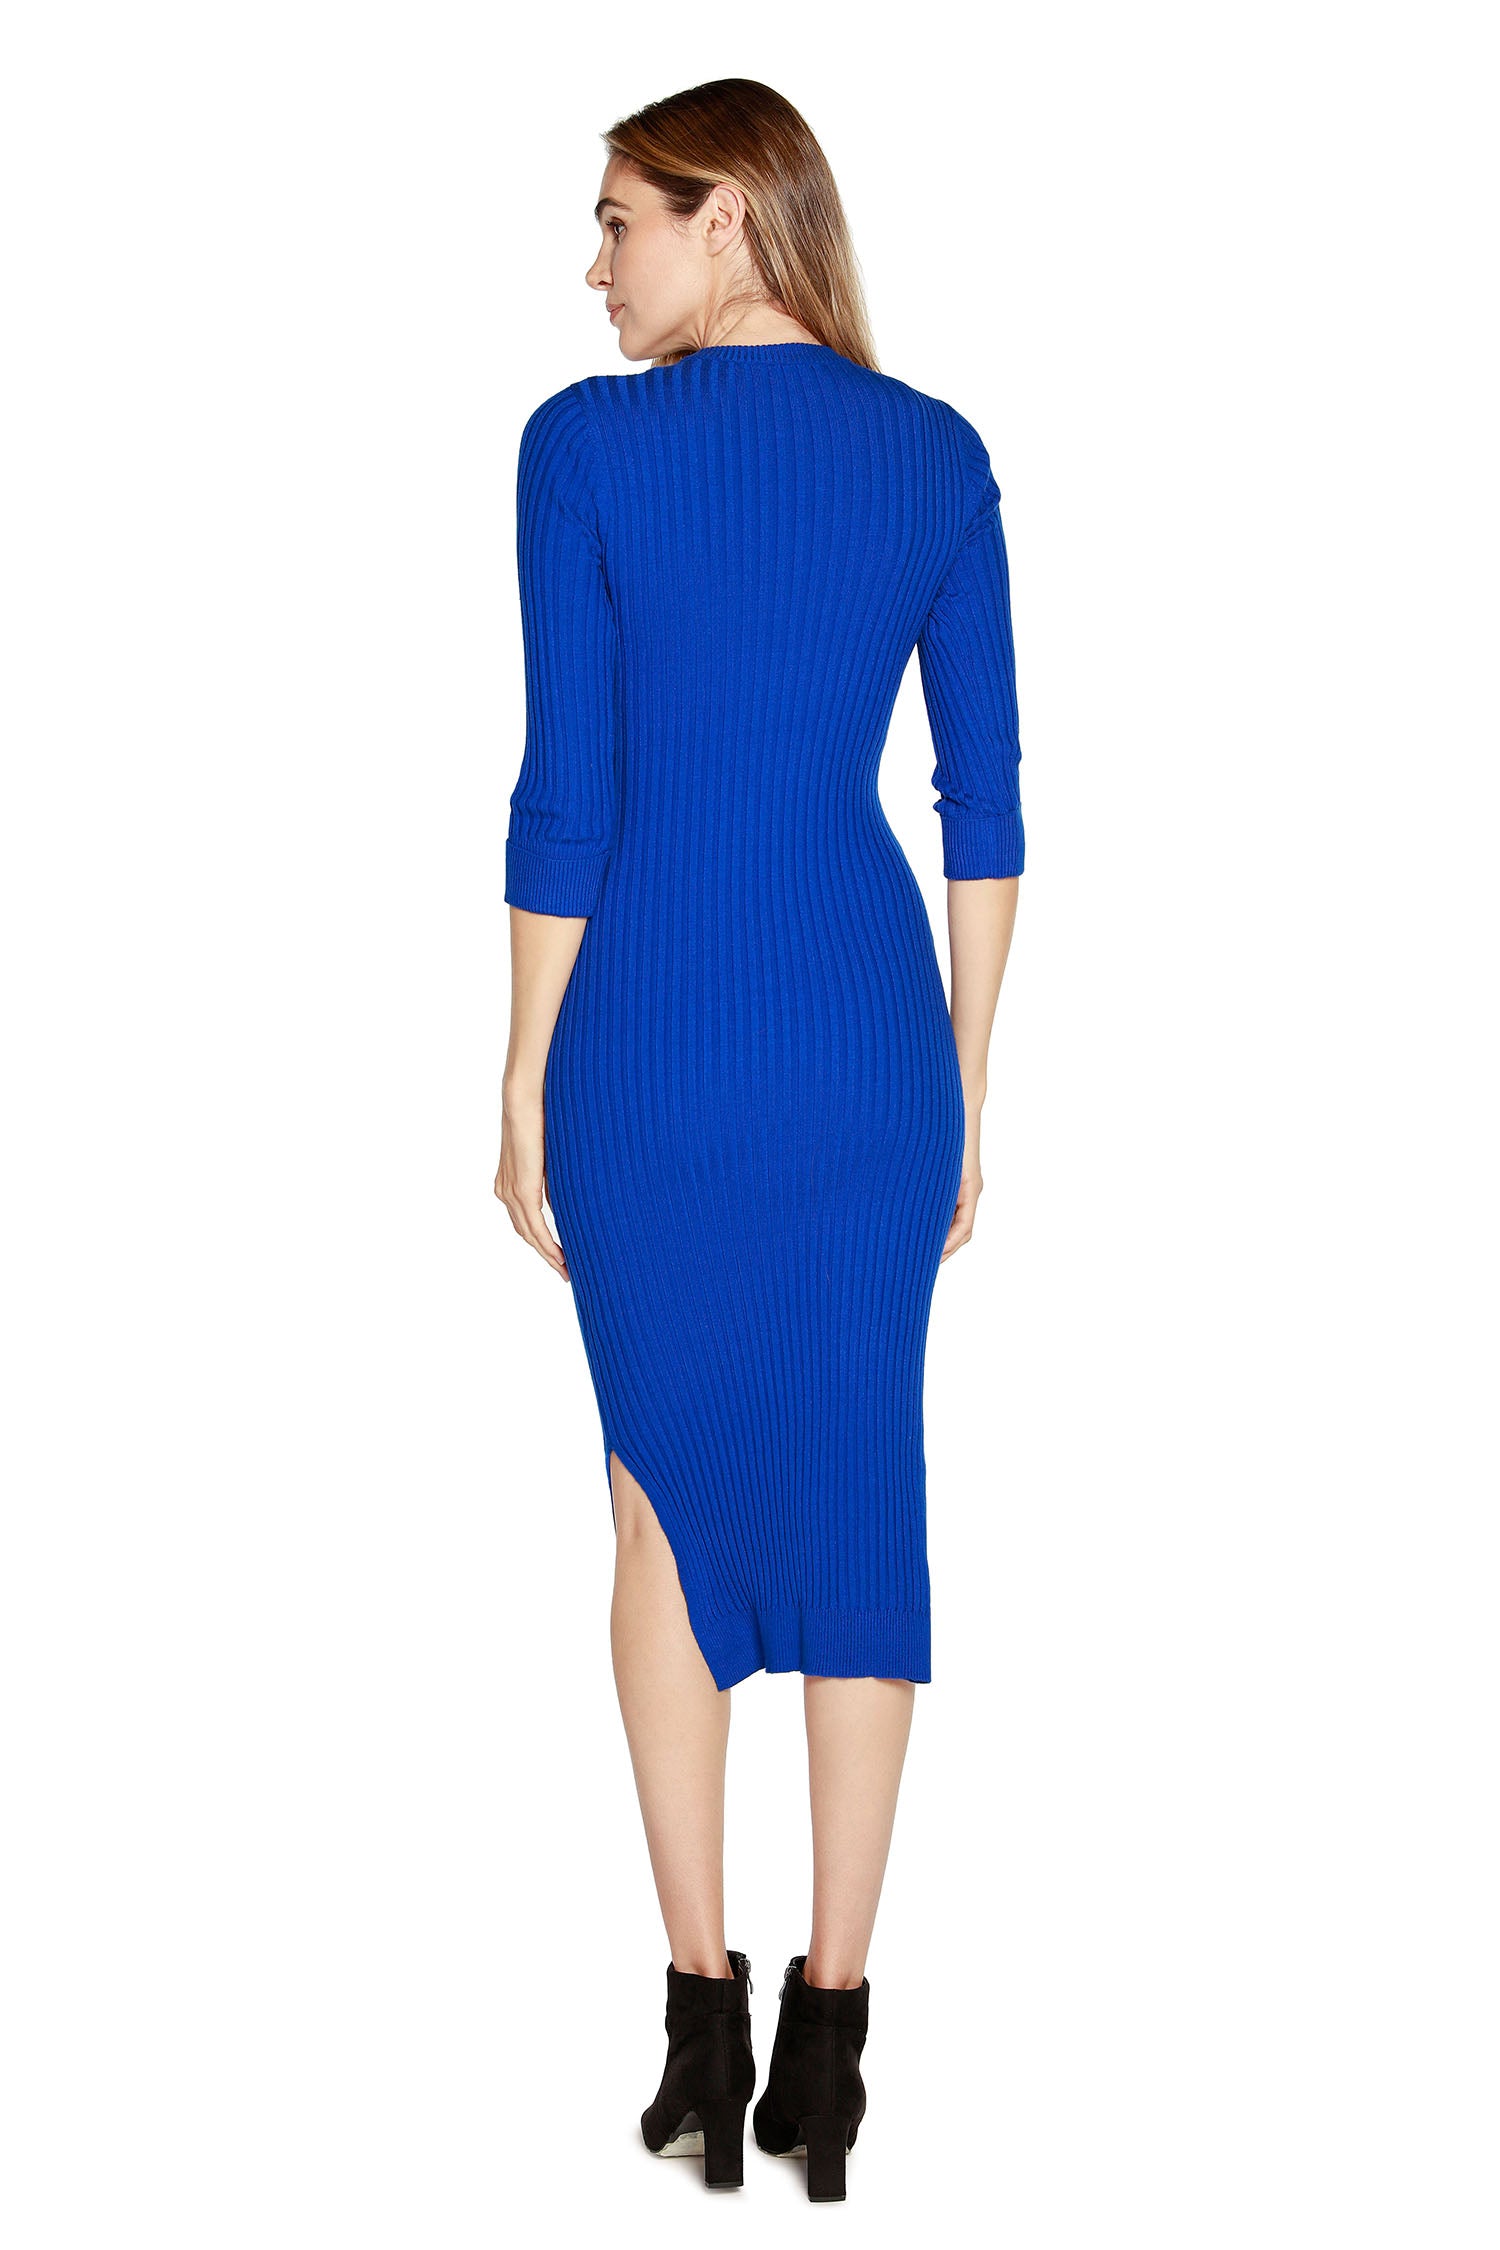 Women's Body Con Sweater Dress with 3/4 Sleeves and Embellished Belt